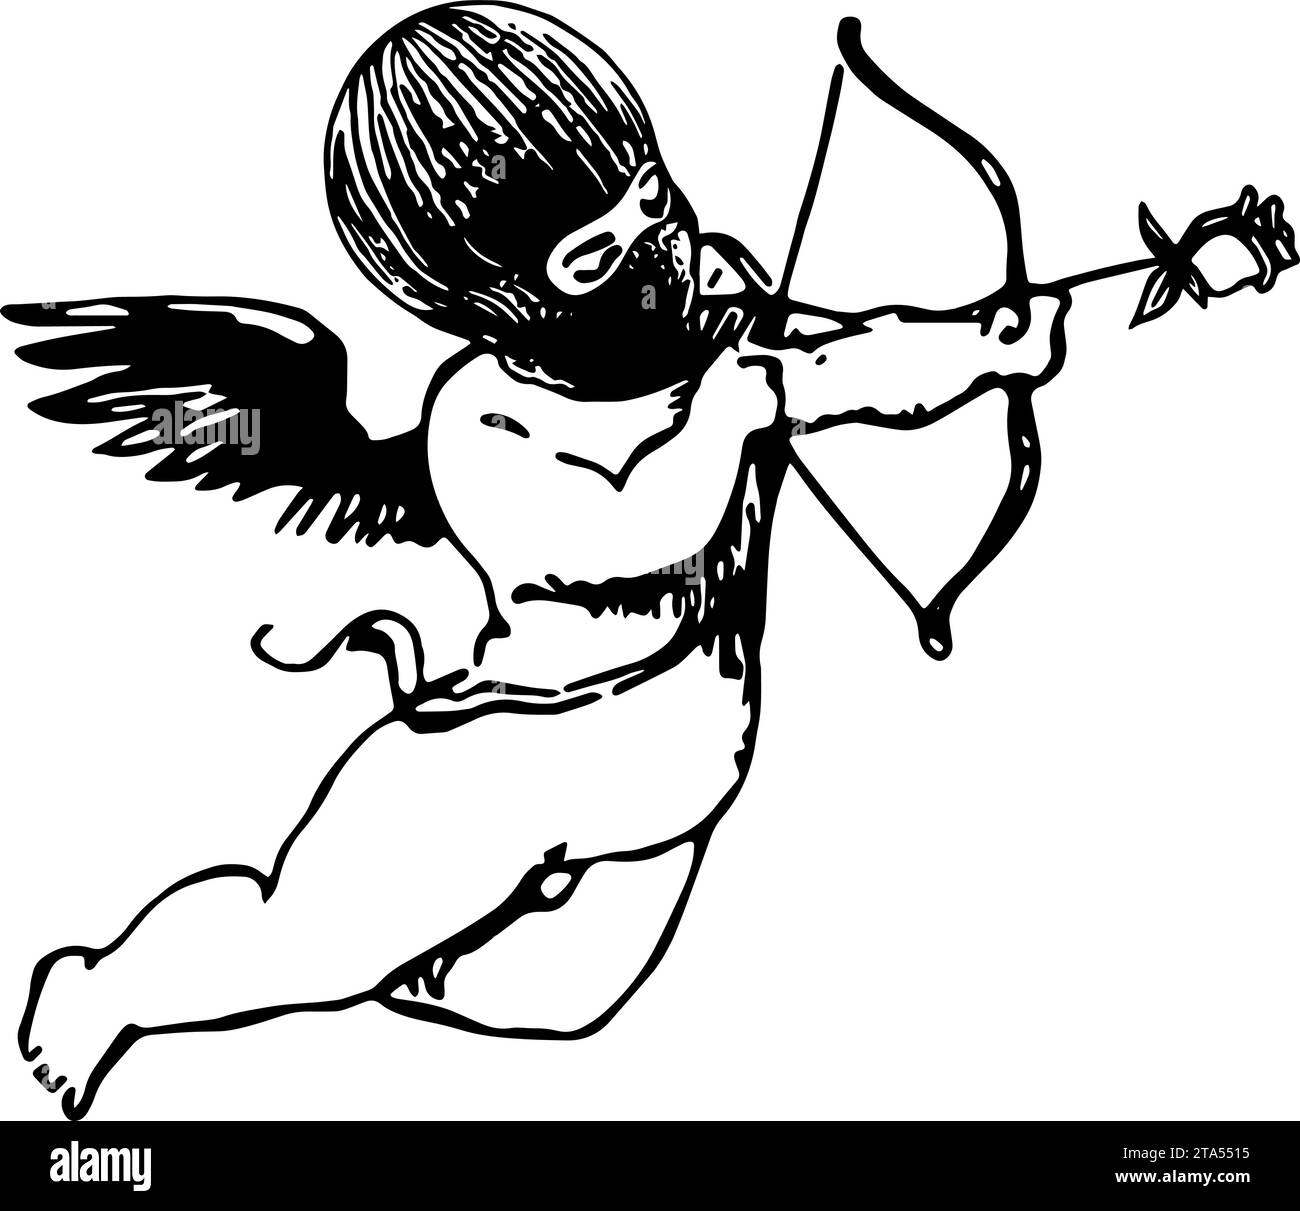 Flying cupid holding a bow and arrow made of a rose with a balaklava illustration hood cherub illustration Stock Vector